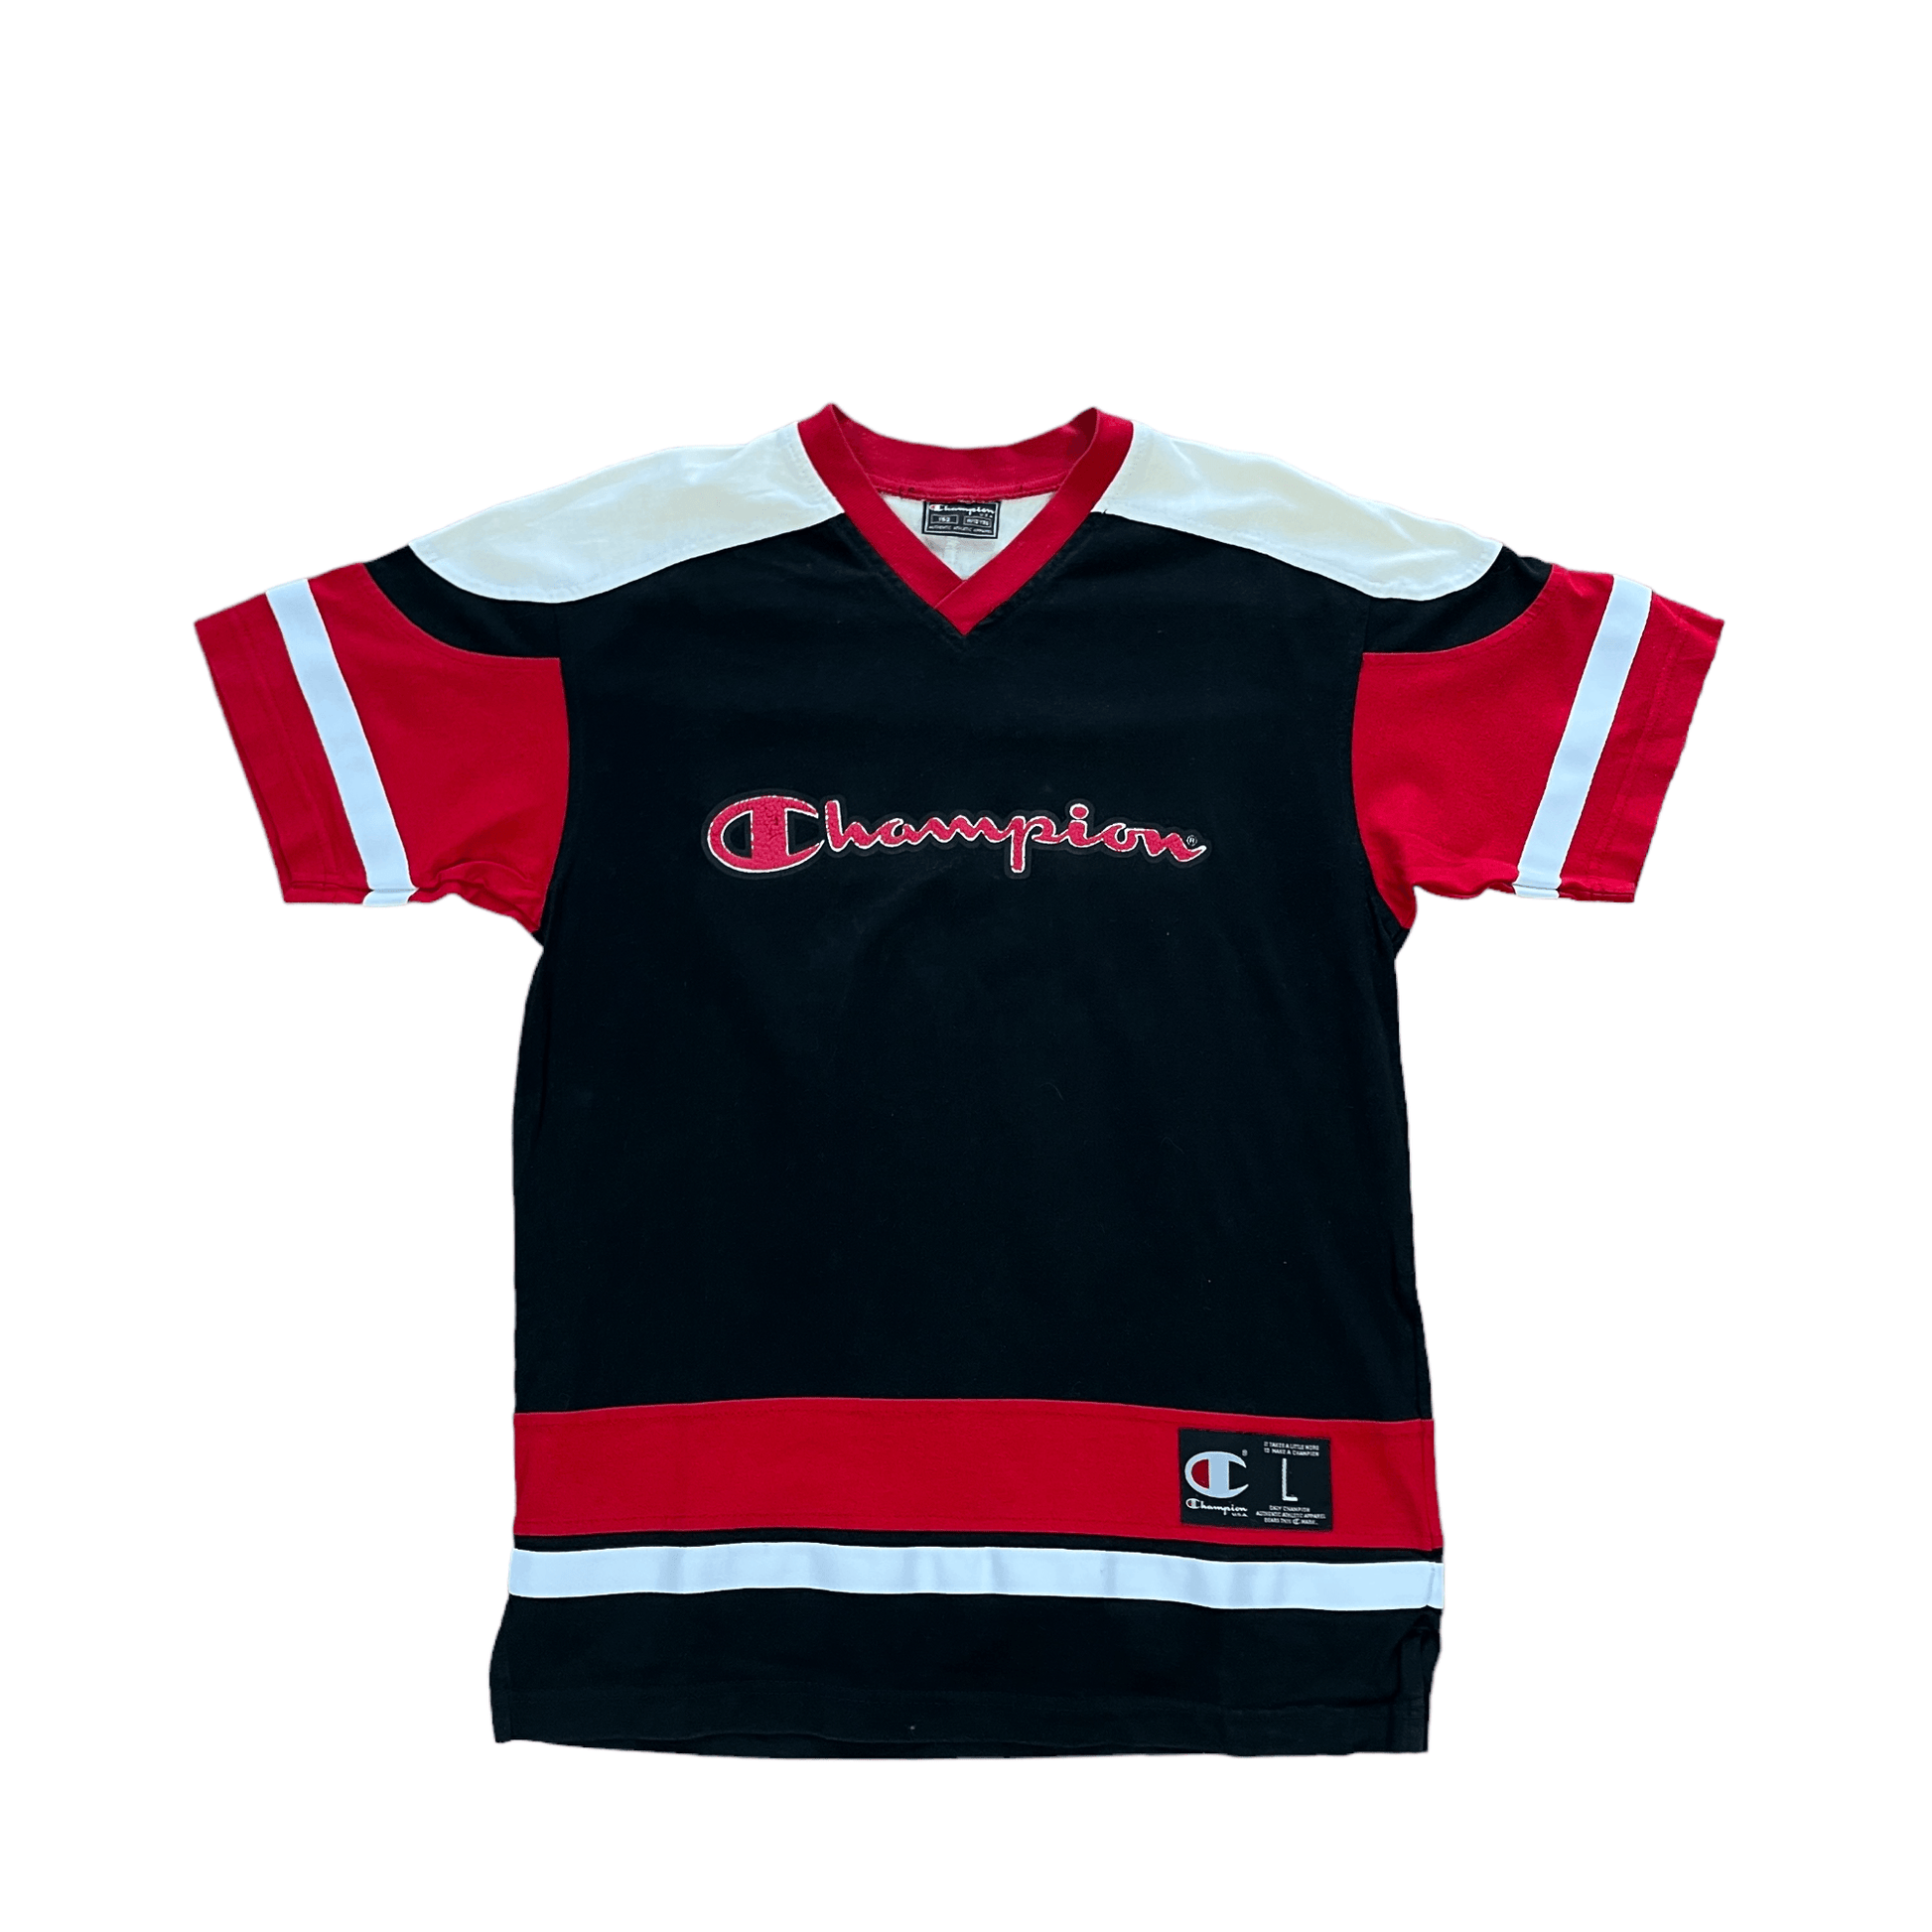 Vintage 90s Black, Red + White Champion Tee - Recommended Size - Small - The Streetwear Studio